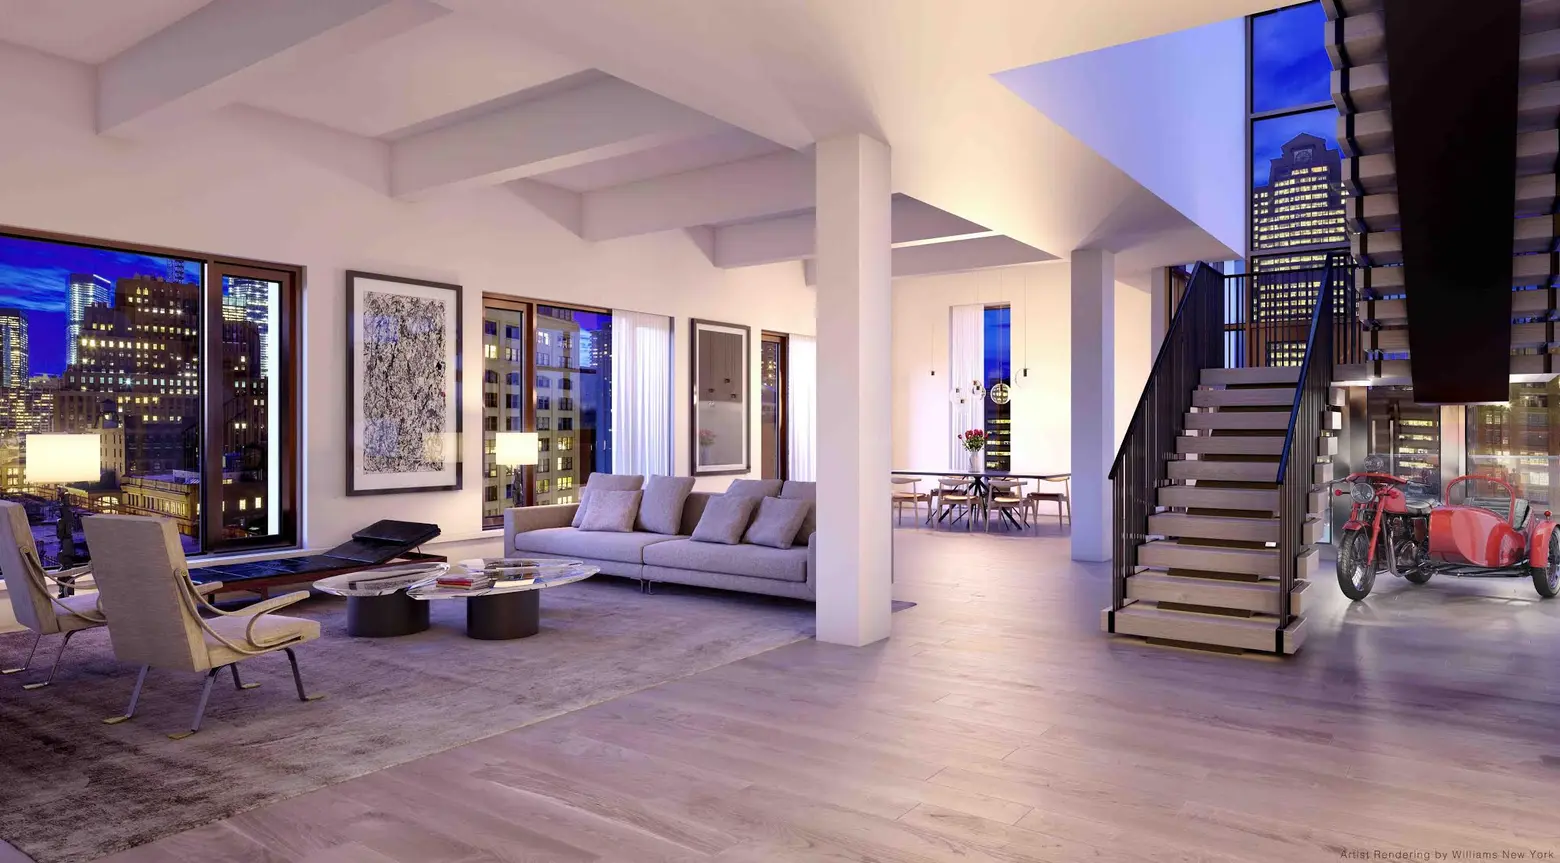 11 Beach Penthouse Asks $22.5M; How a Broker Knows a Couple Will Break Up